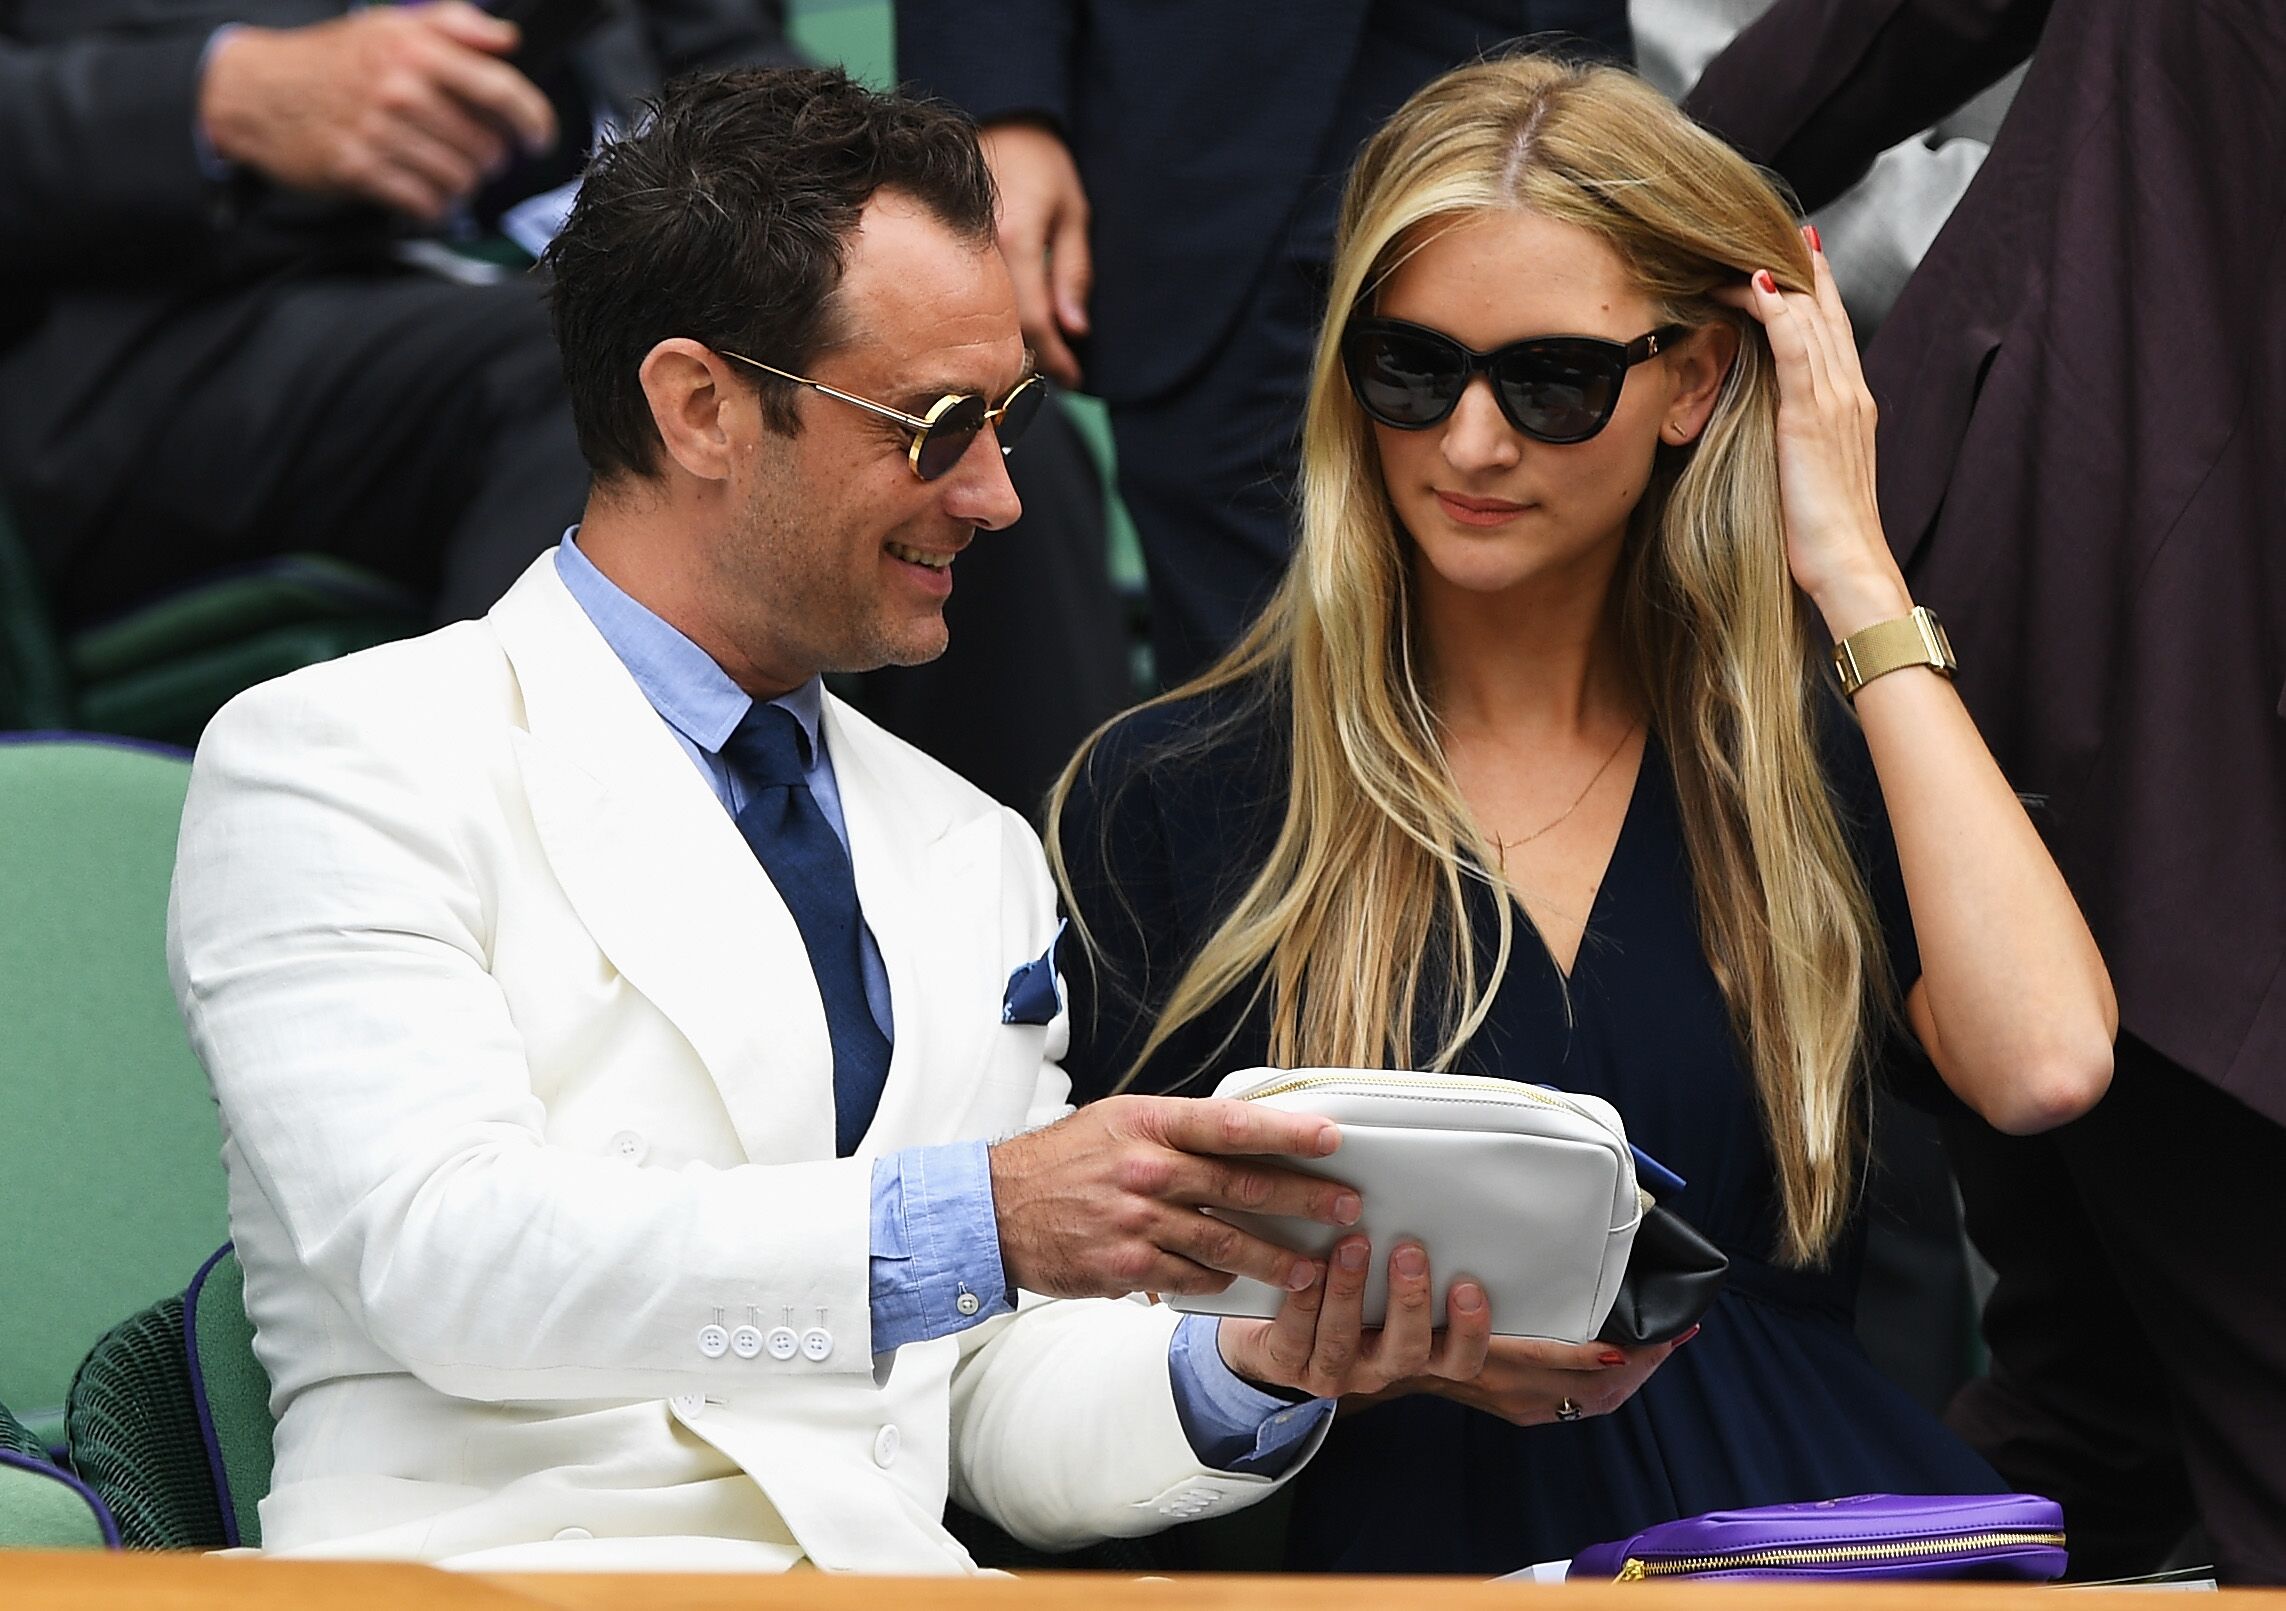 Jude Law and Phillipa Coan watch on as Roger Federer of Switzerland plays Milos Raonic of Canada in the Men's Singles Semi Final match on day eleven of the Wimbledon Lawn Tennis Championships at the All England Lawn Tennis and Croquet Club on July 8, 2016 in London, England. | Photo: Getty Images